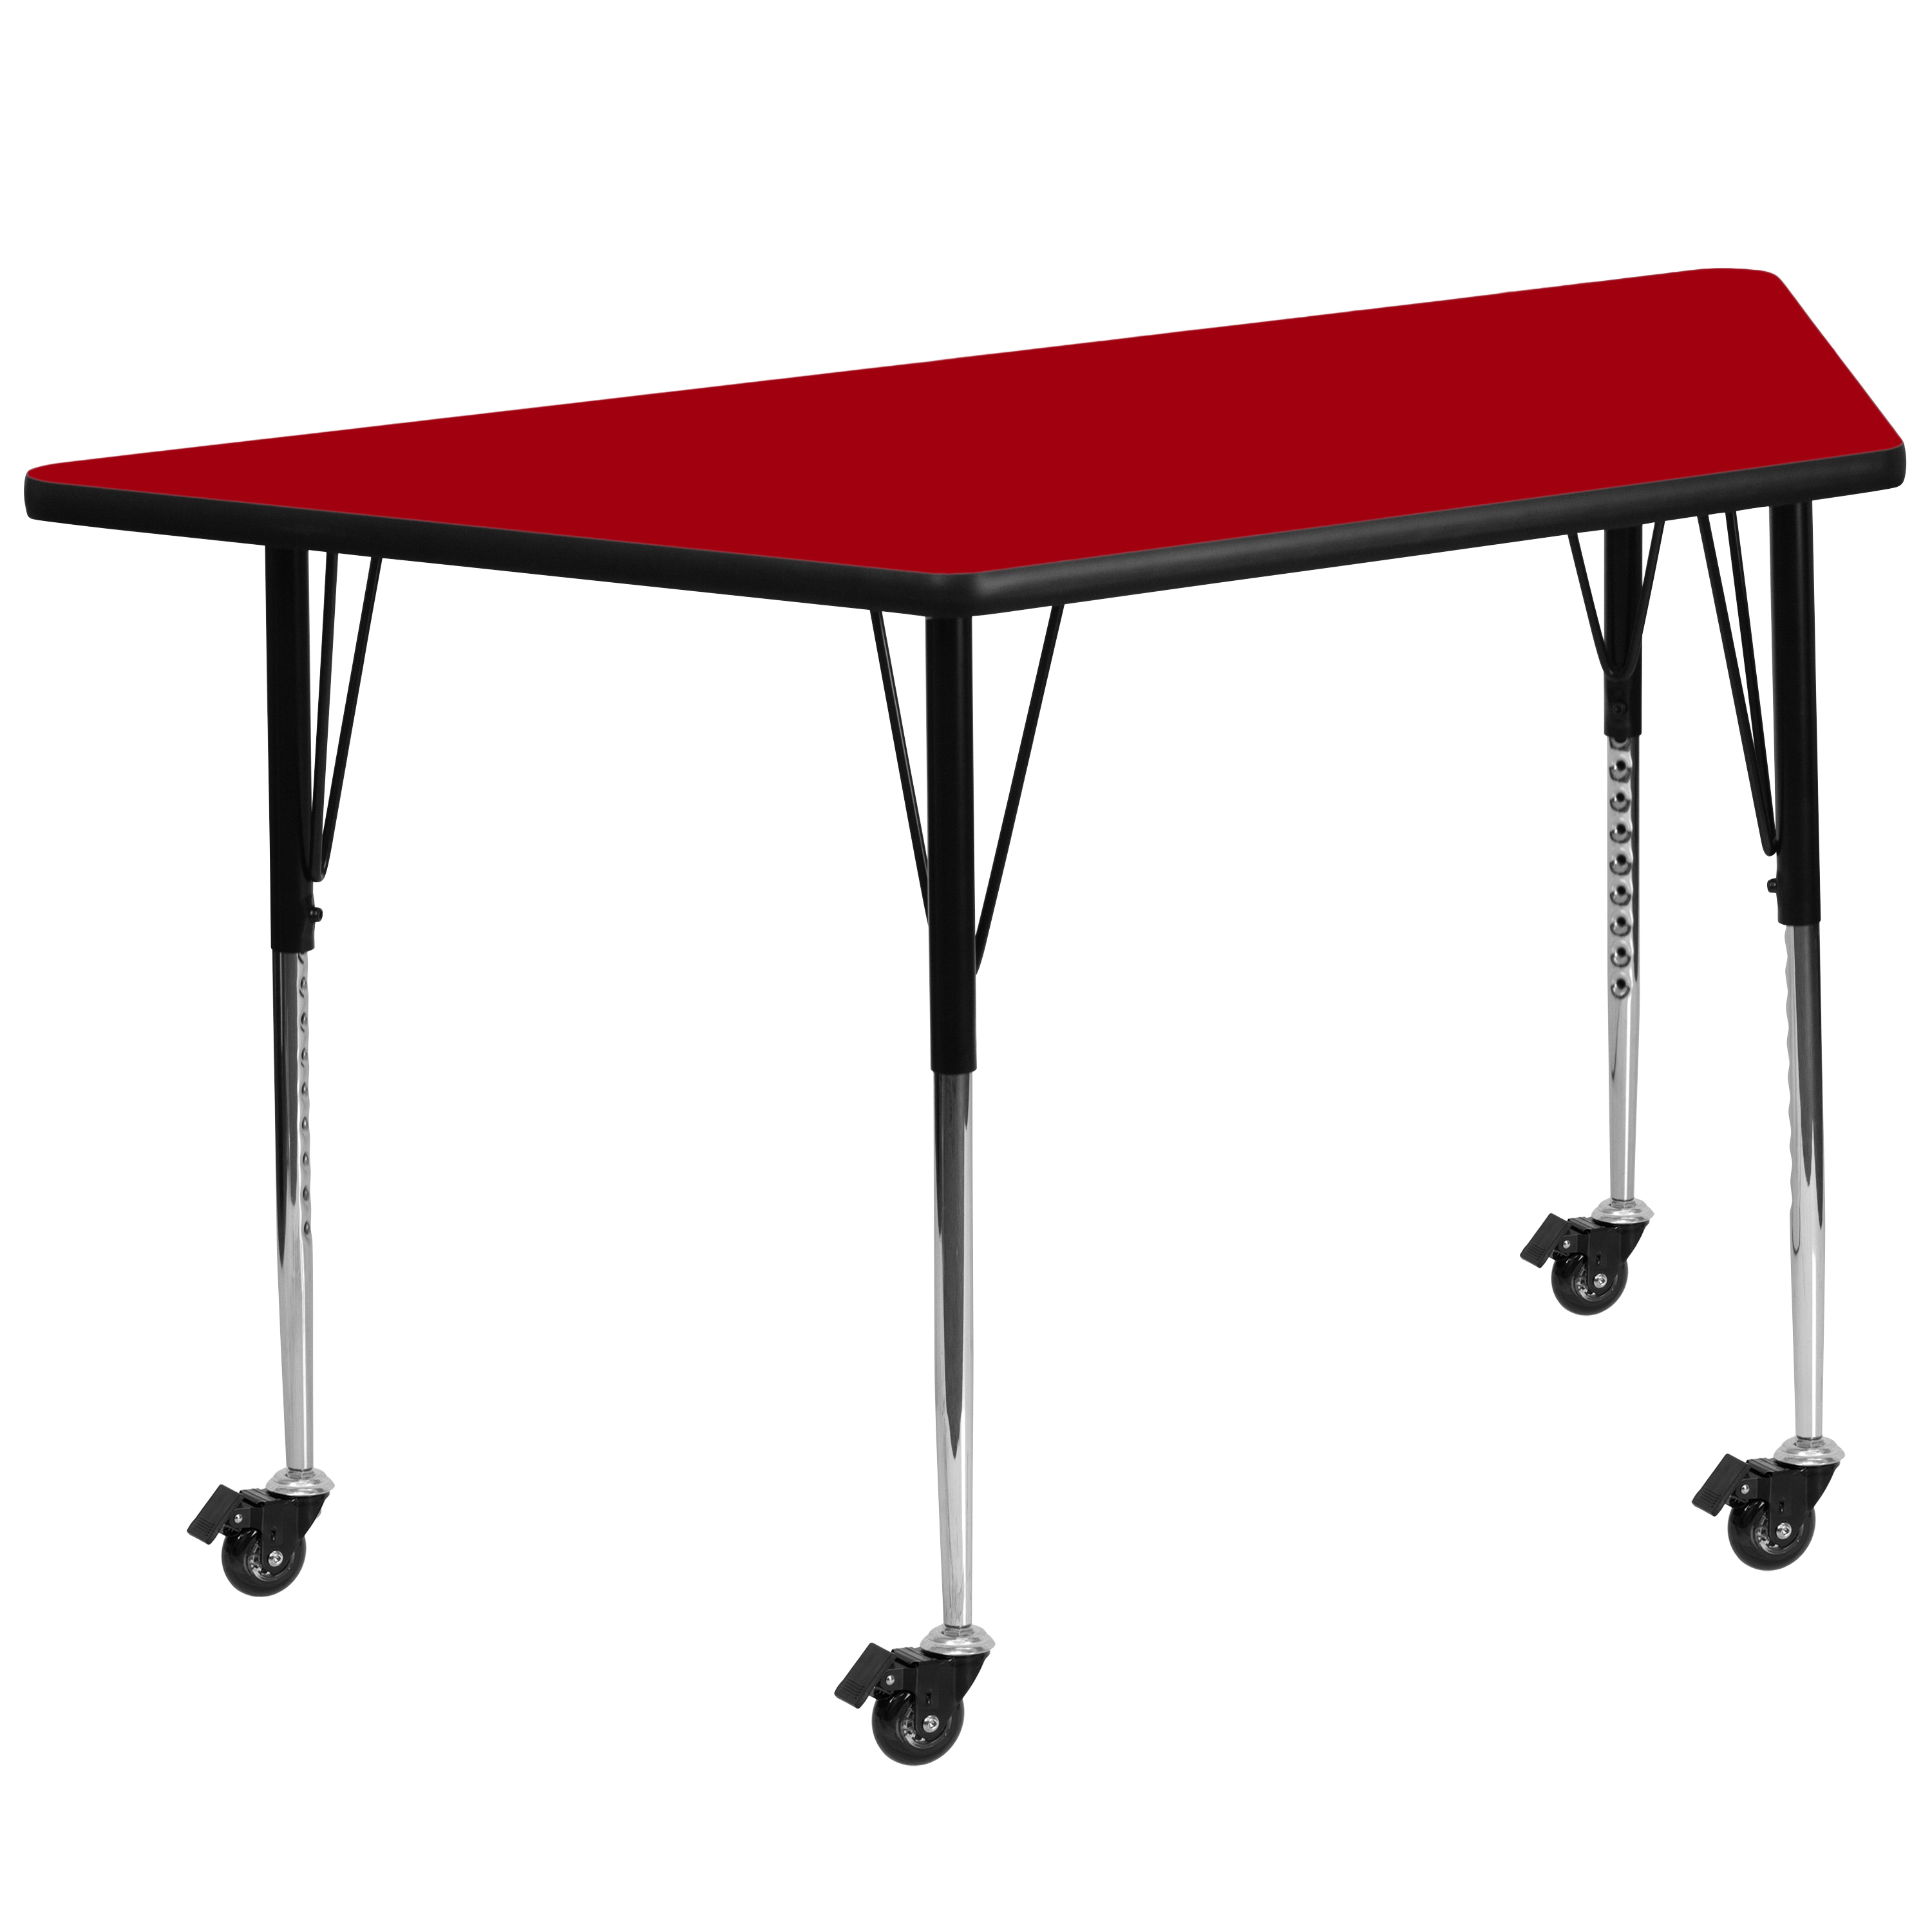 Flash Furniture Mobile 29''W x 57''L Trapezoid Red Thermal Laminate Activity Table - Standard Height Adjustable Legs - image 1 of 5